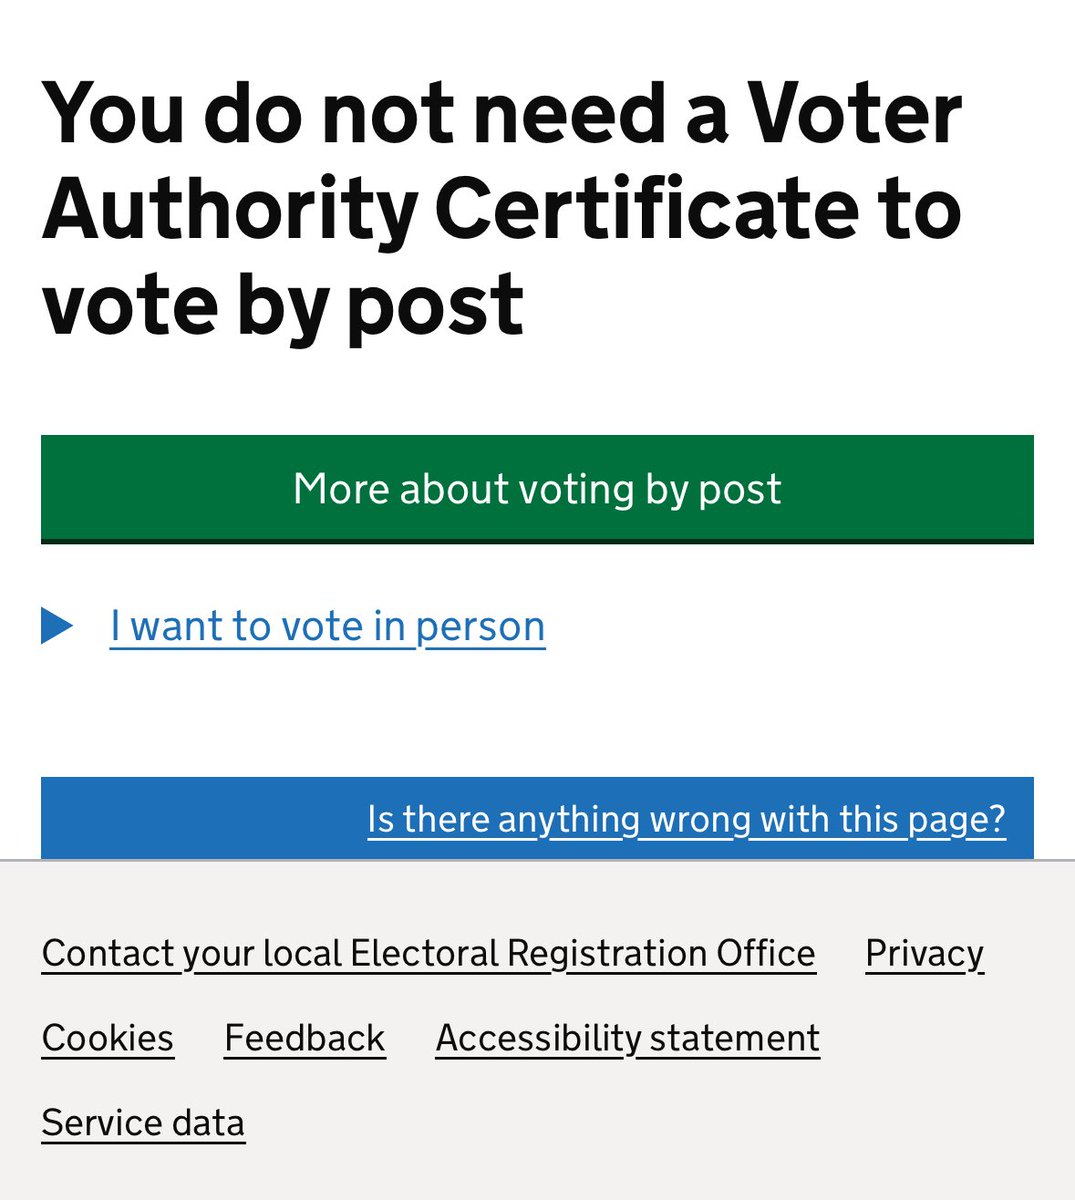 Register to vote by post and you do not need an ID card. So if you don’t want to have the hassle of the polling station, this is available